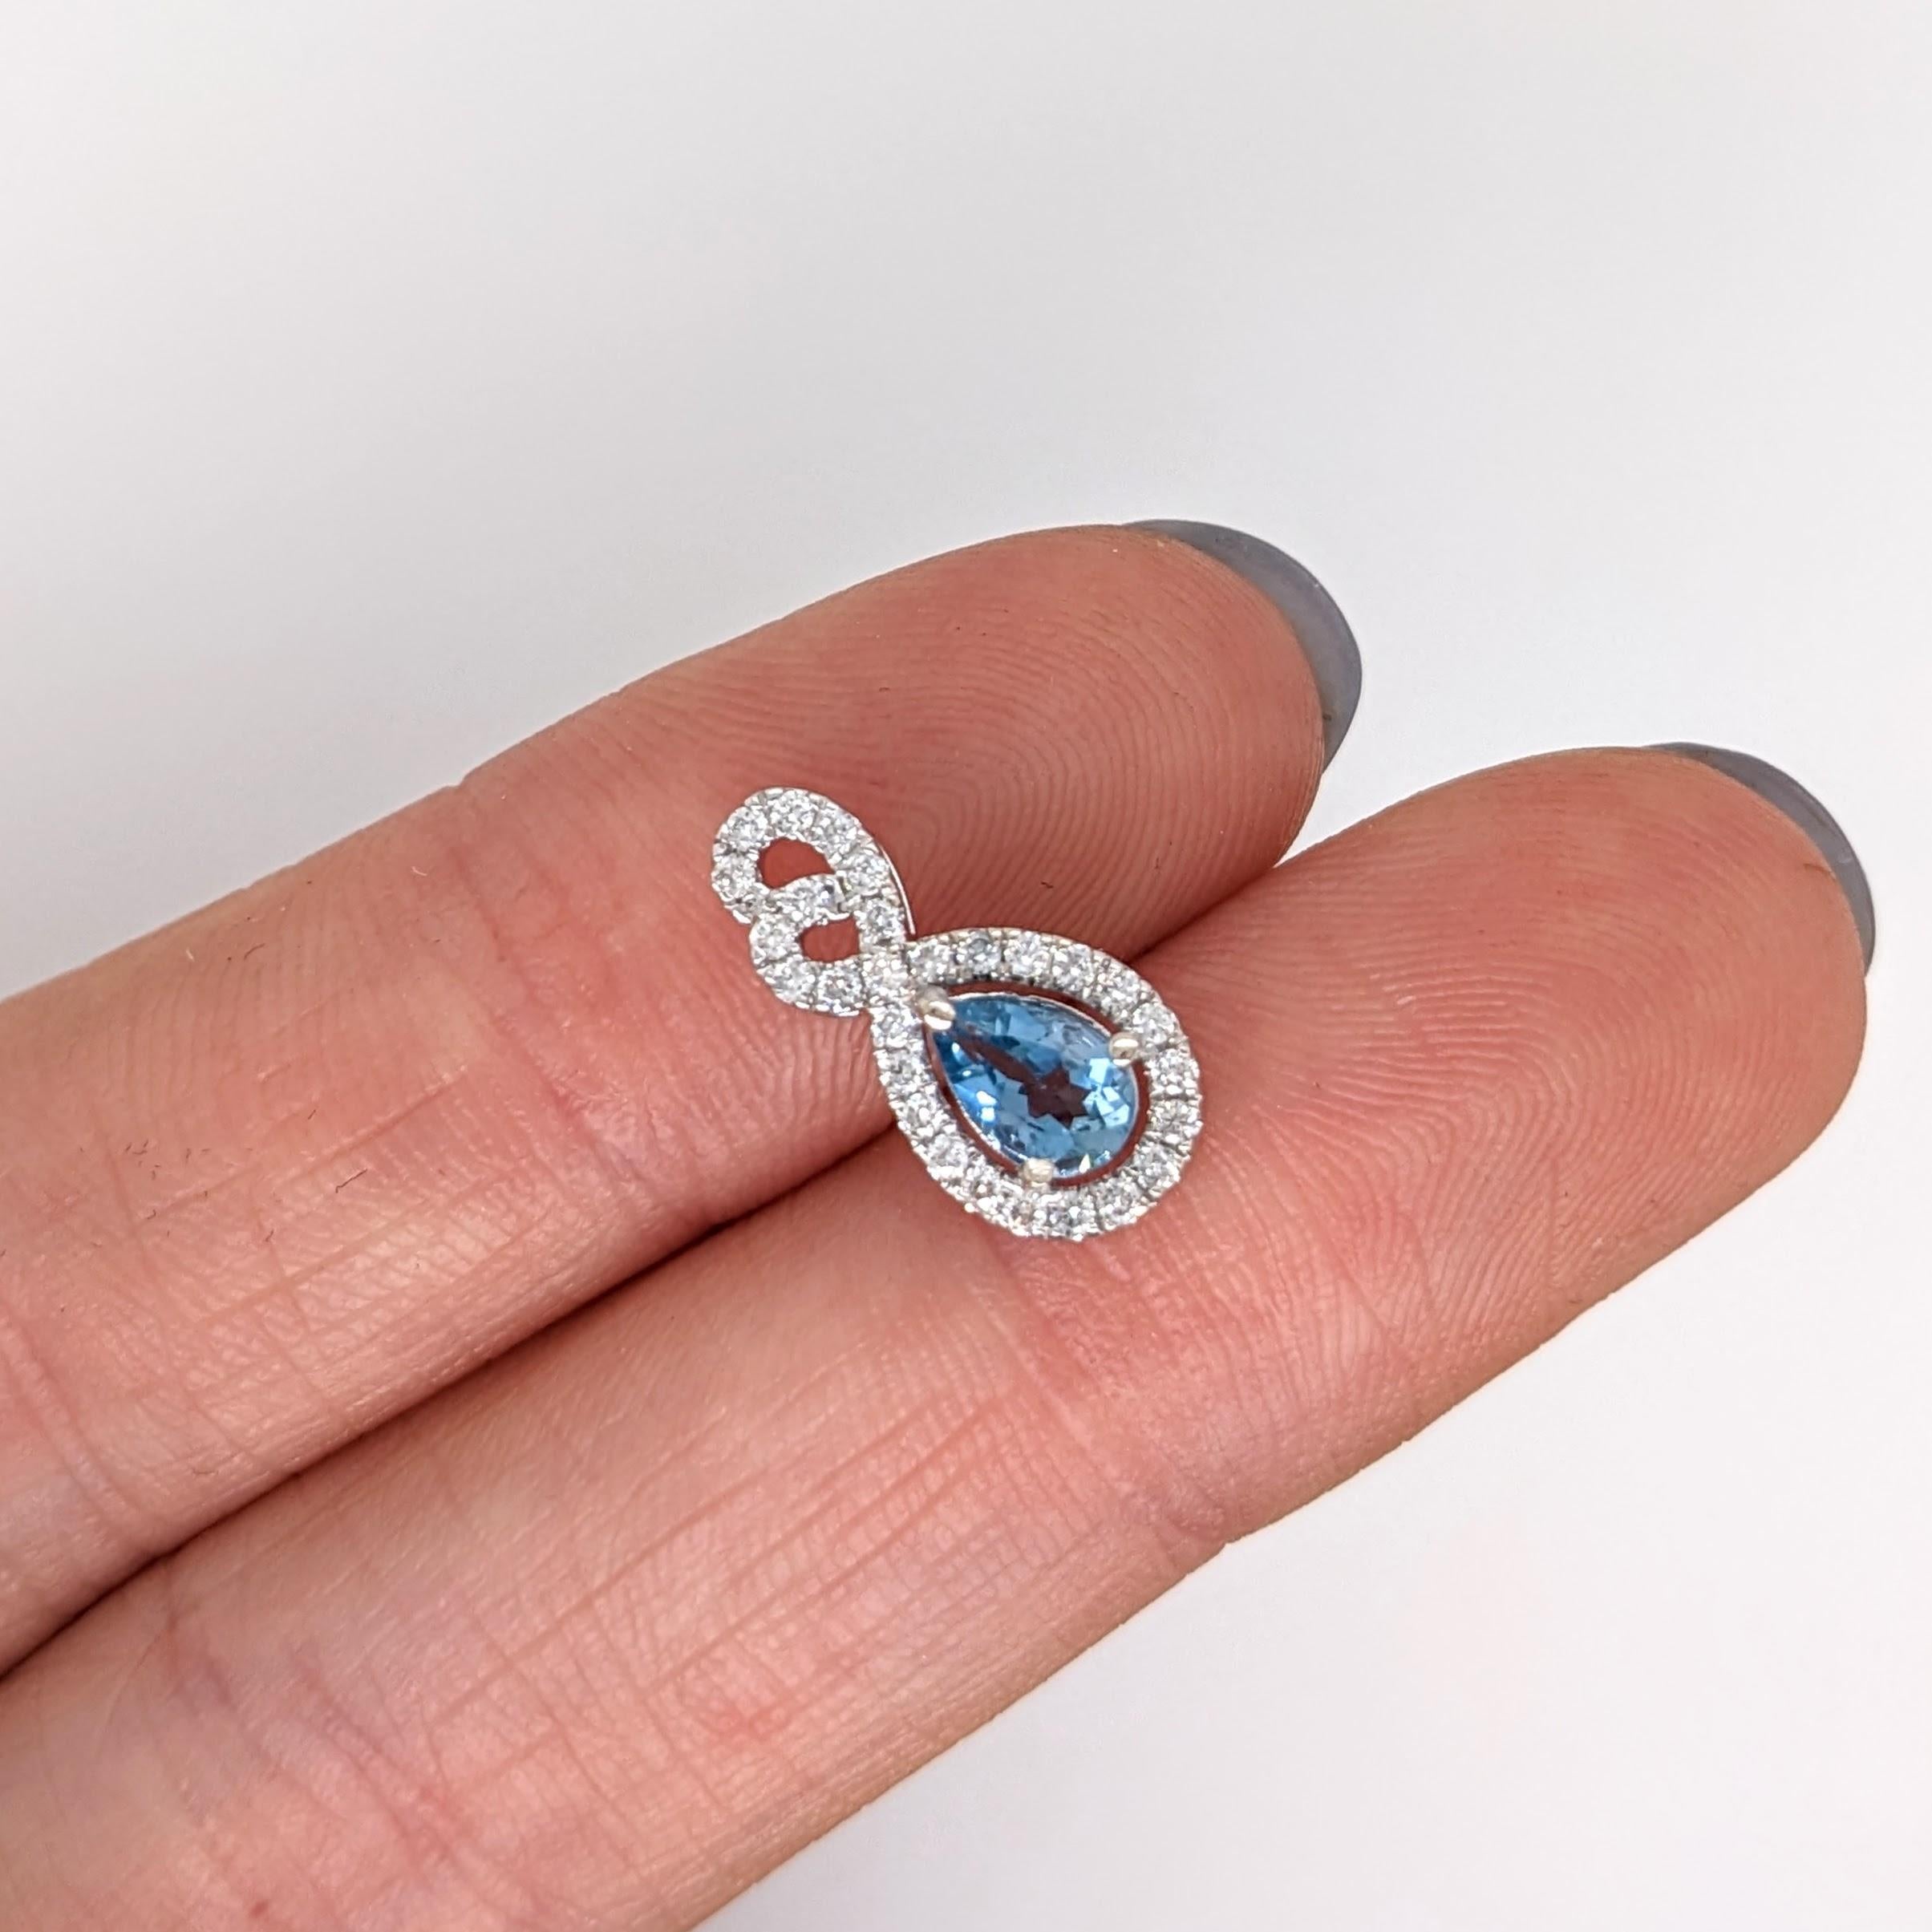 This beautiful pendant features a 0.35 carat pear shape aquamarine gemstone with natural earth mined diamonds all set in solid 14K gold. This pendant can be a lovely march birthstone gift for your loved ones! 

Specifications

Item Type: